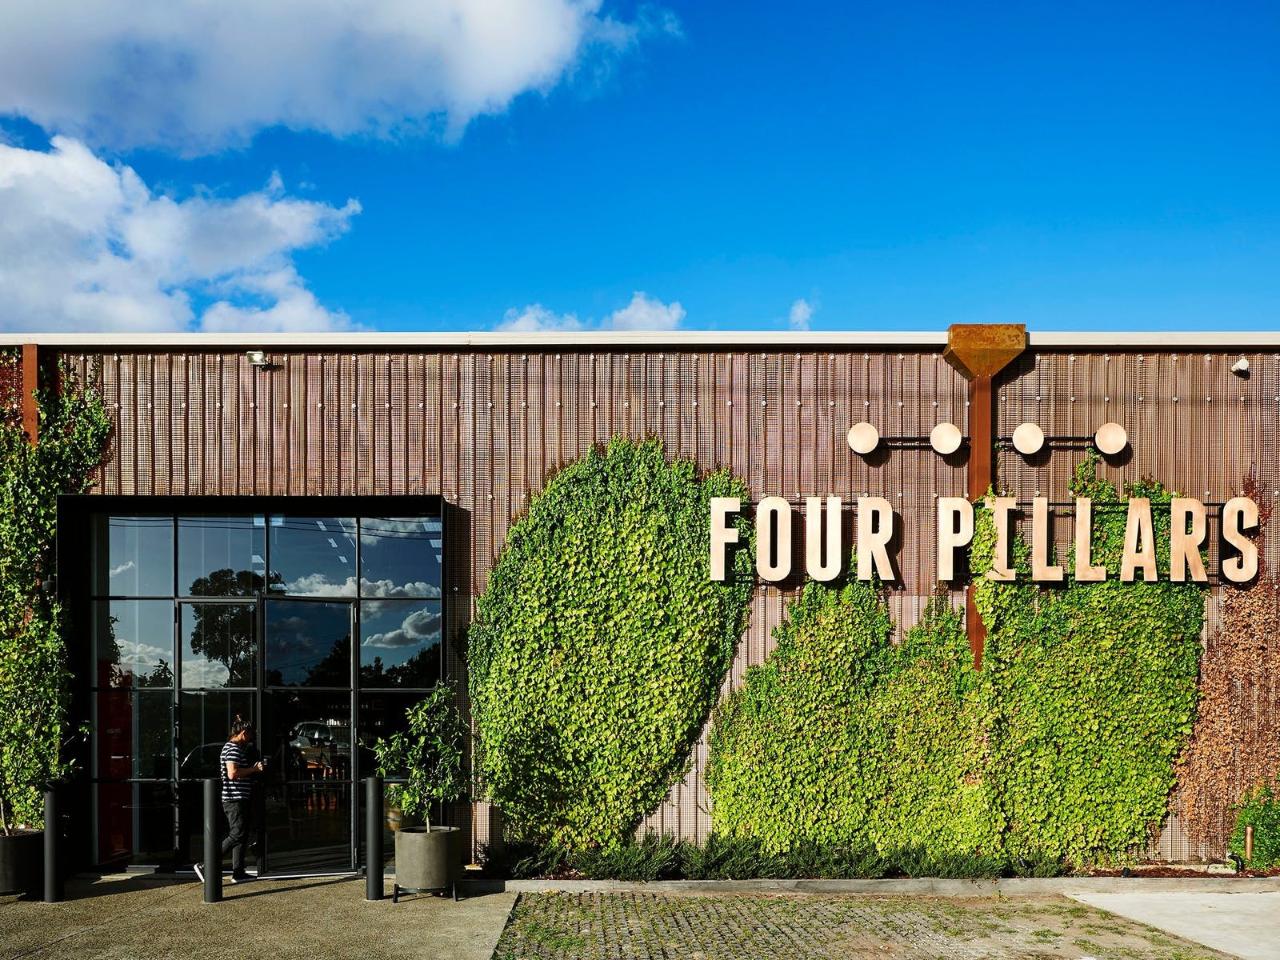 Tours for Two Private Luxury Yarra Valley Lunch and Wine with Four Pillars Gin Tasting. A unique experience designed for you to celebrate, commemorate and enjoy the very best City and Suburb Transfers